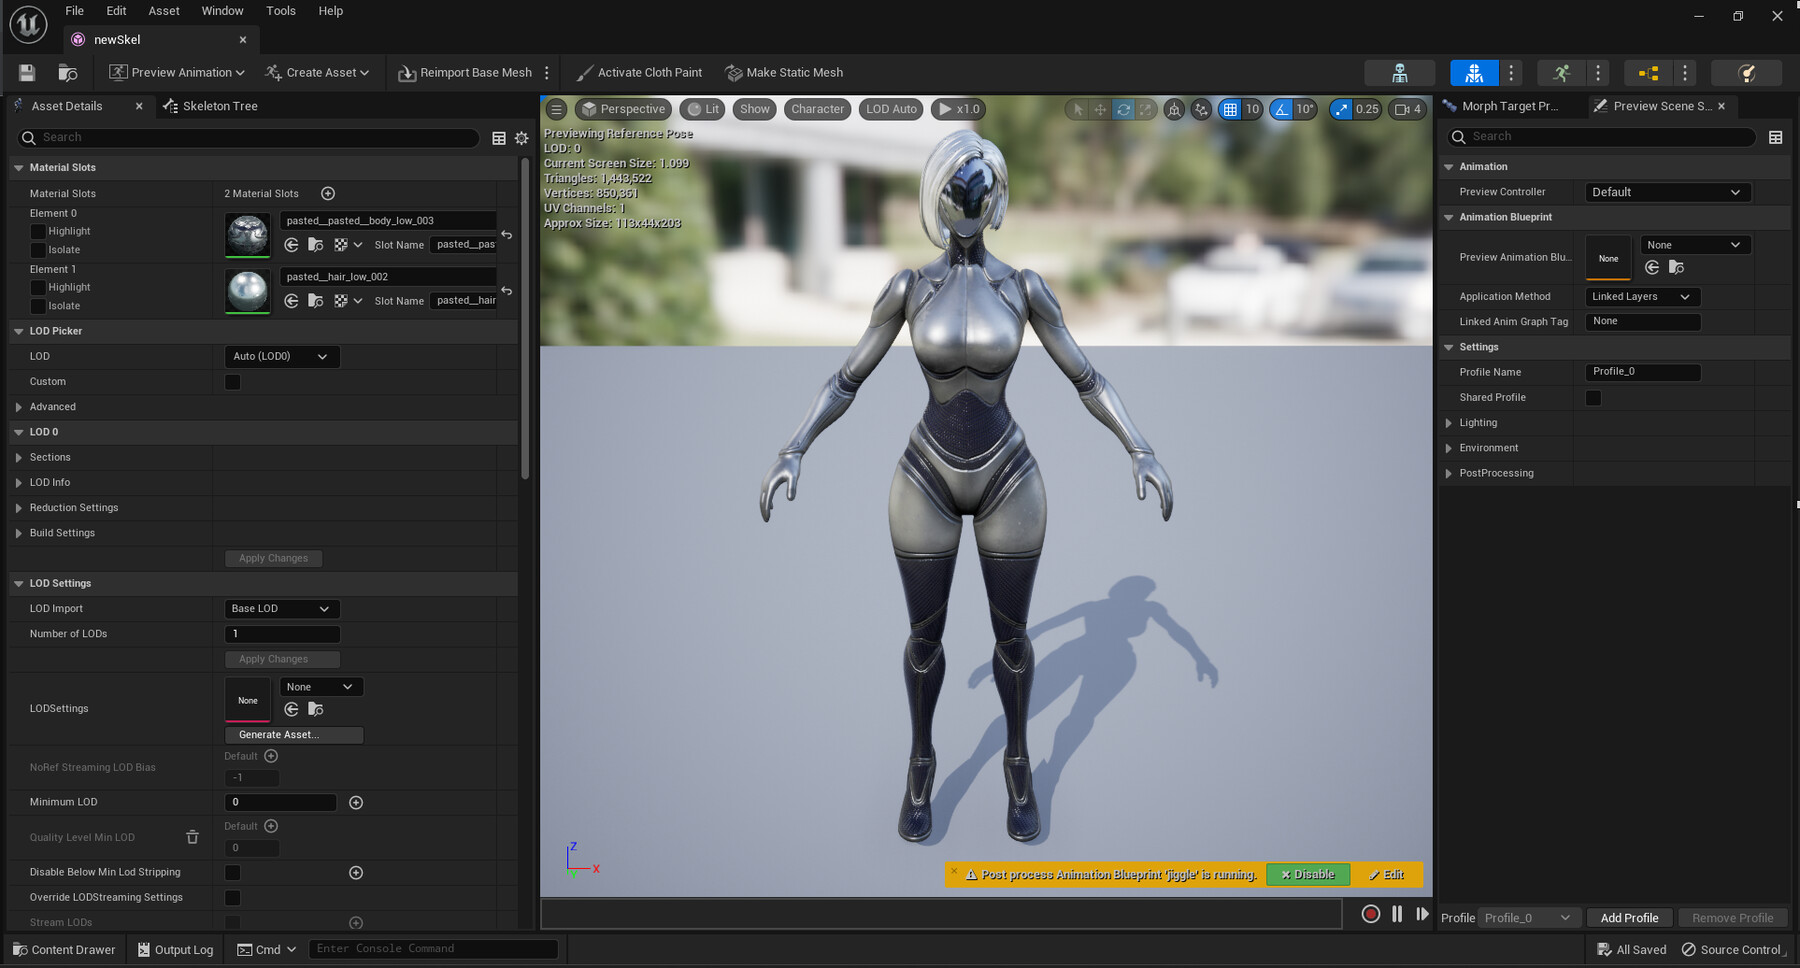 3D Animator required at Glitch Productions - Maya, Unreal Engine 5